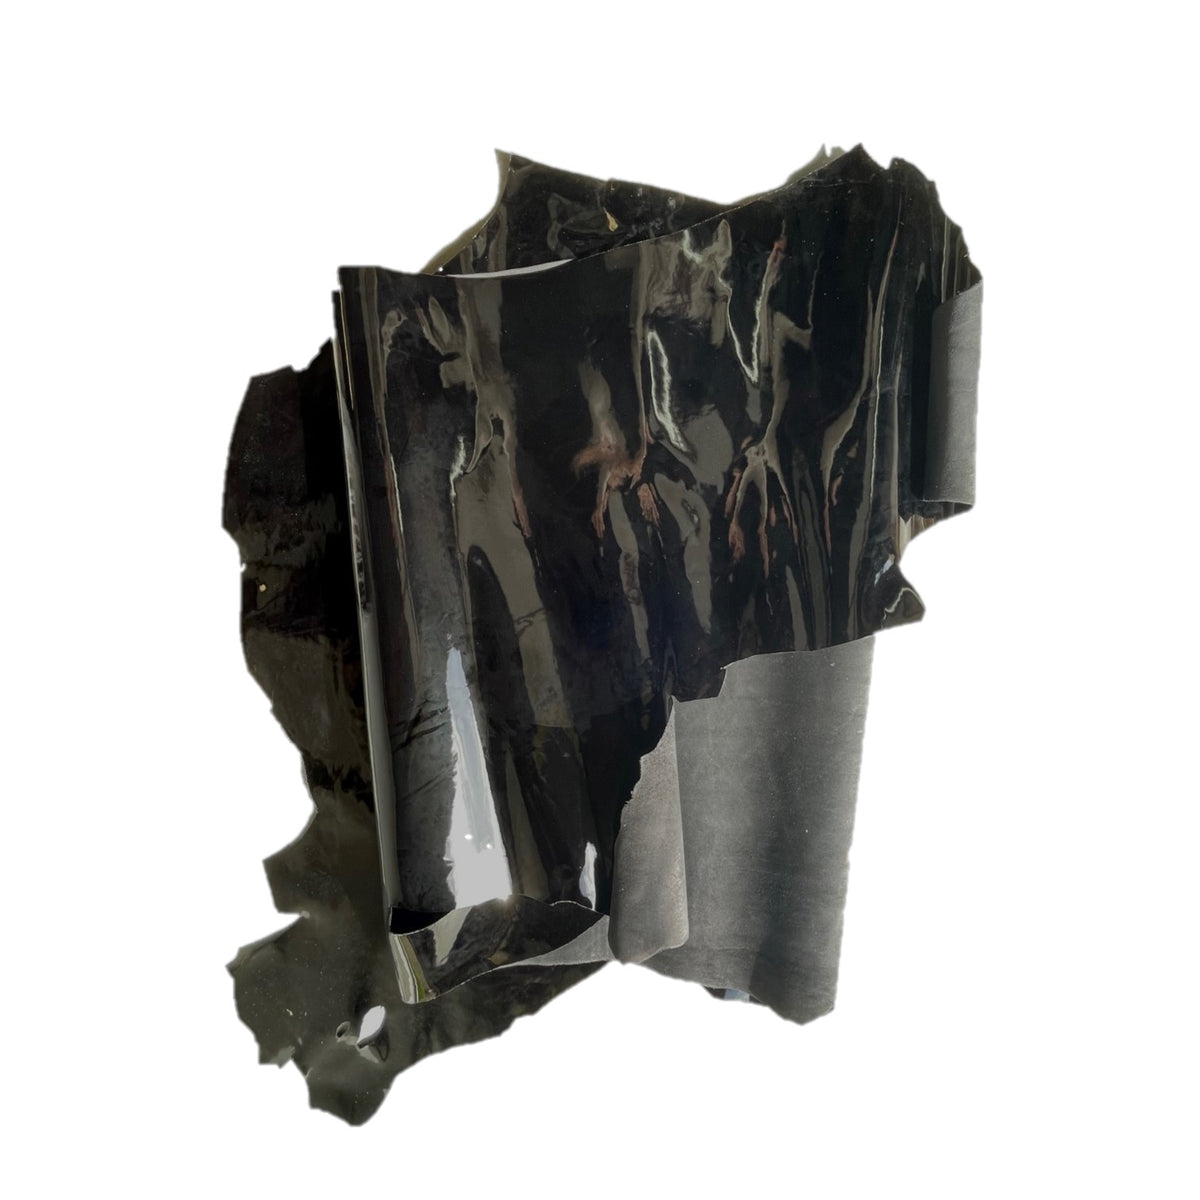 Patent Black Cow Side | 1.2mm | 23 sq.ft | from $300 ea.